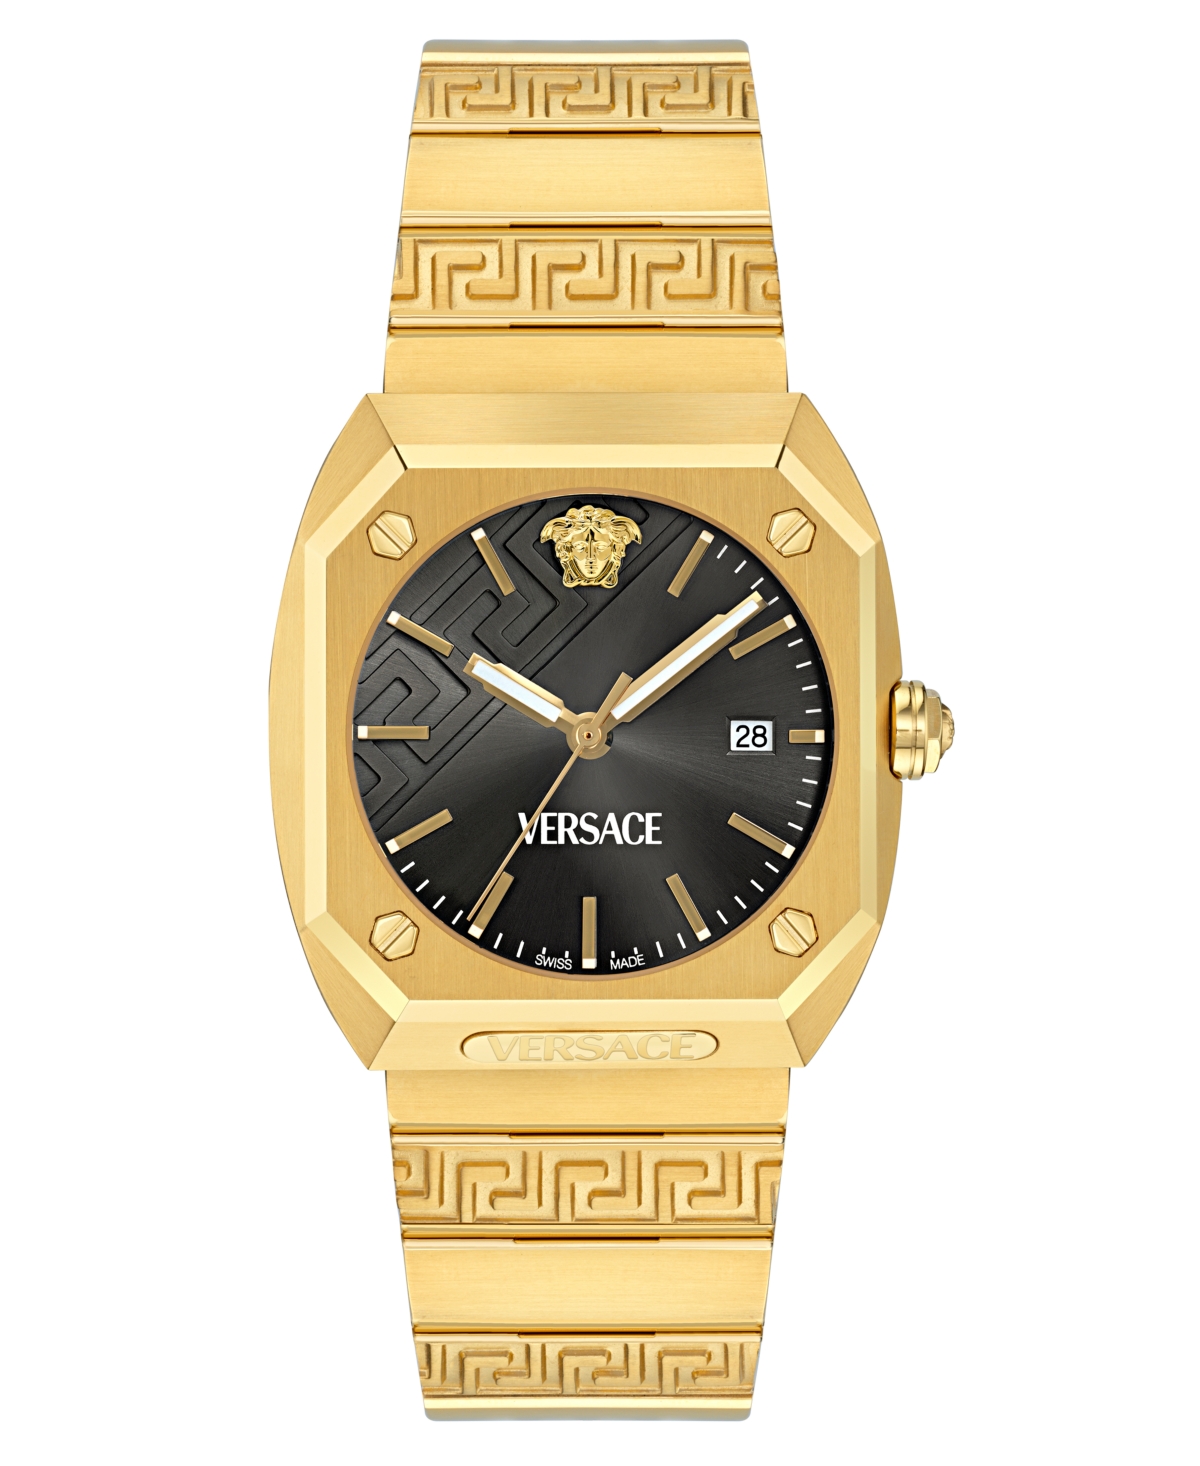 Versace Men's Swiss Gold Ion Plated Stainless Steel Bracelet Watch 44mm